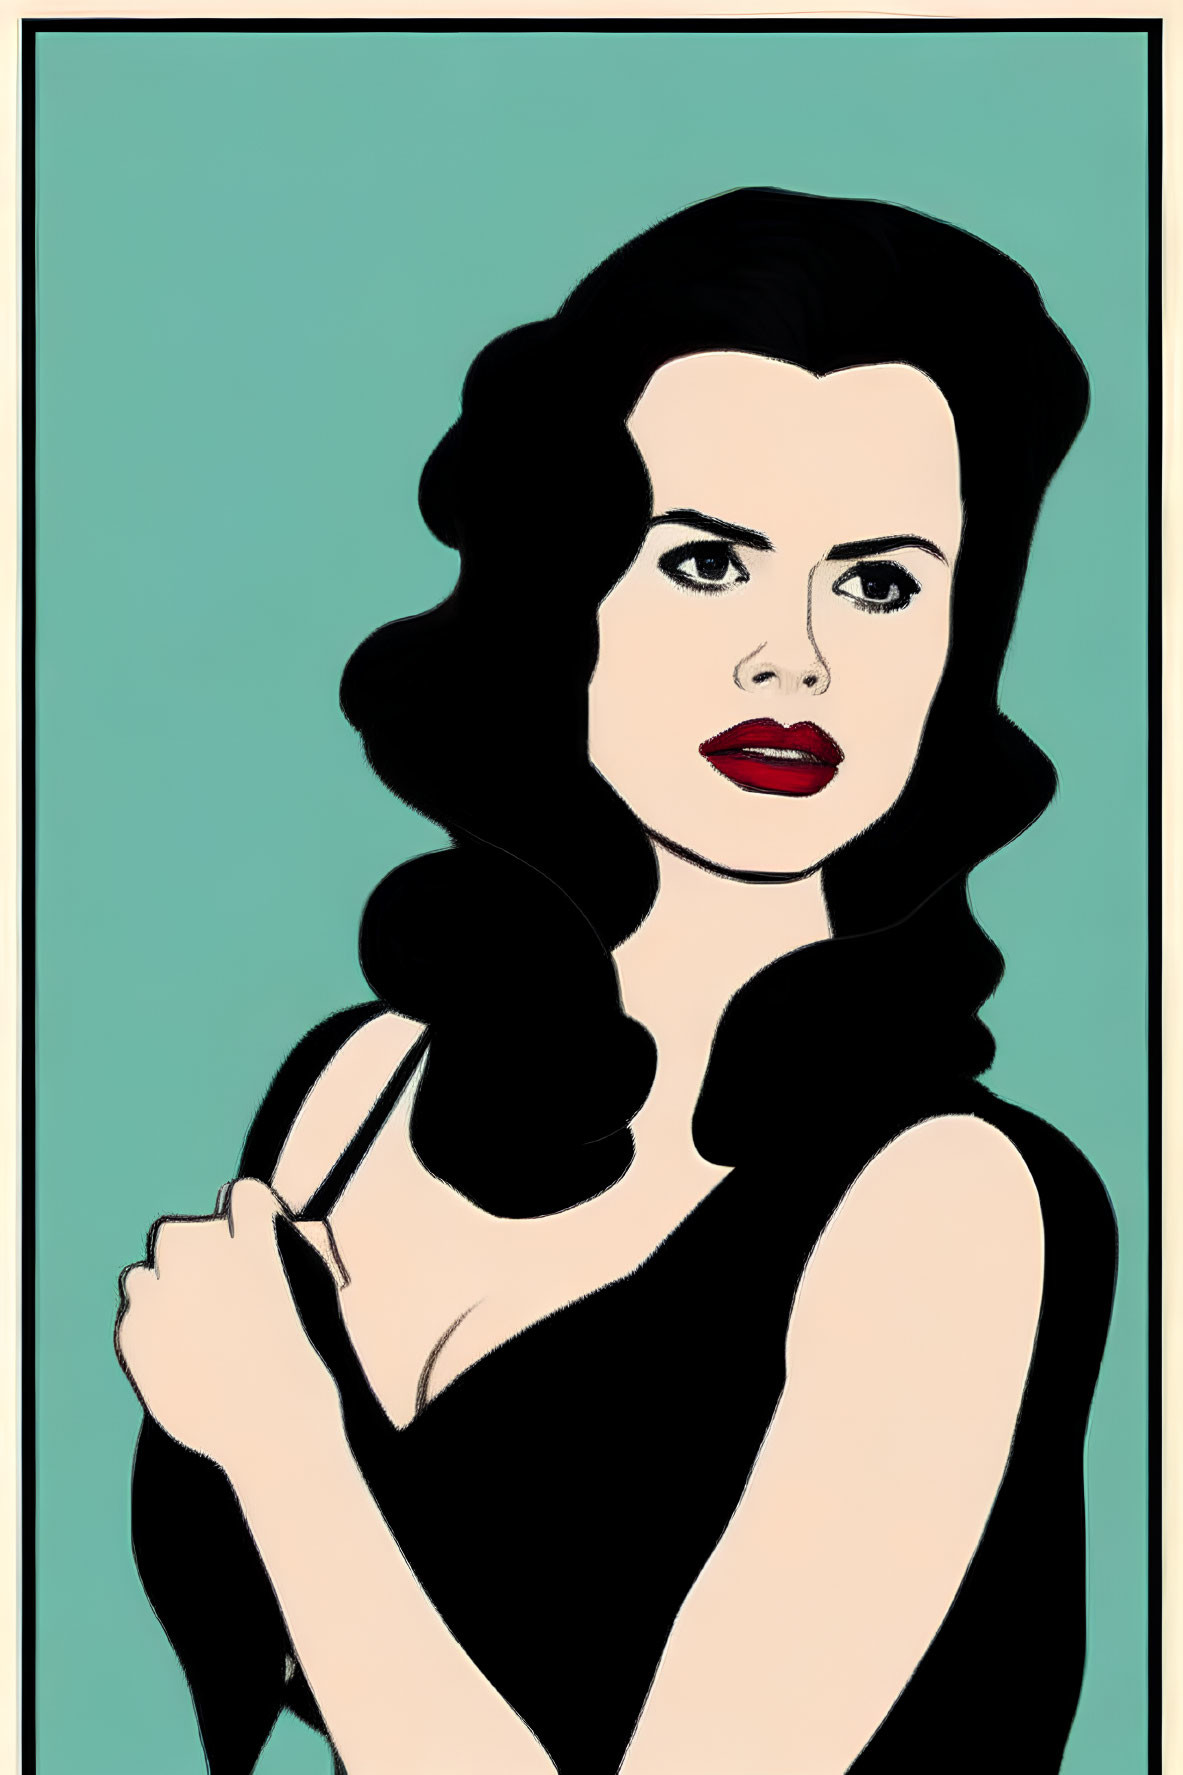 Vintage-style illustration of woman with dark curly hair and red lipstick against teal background